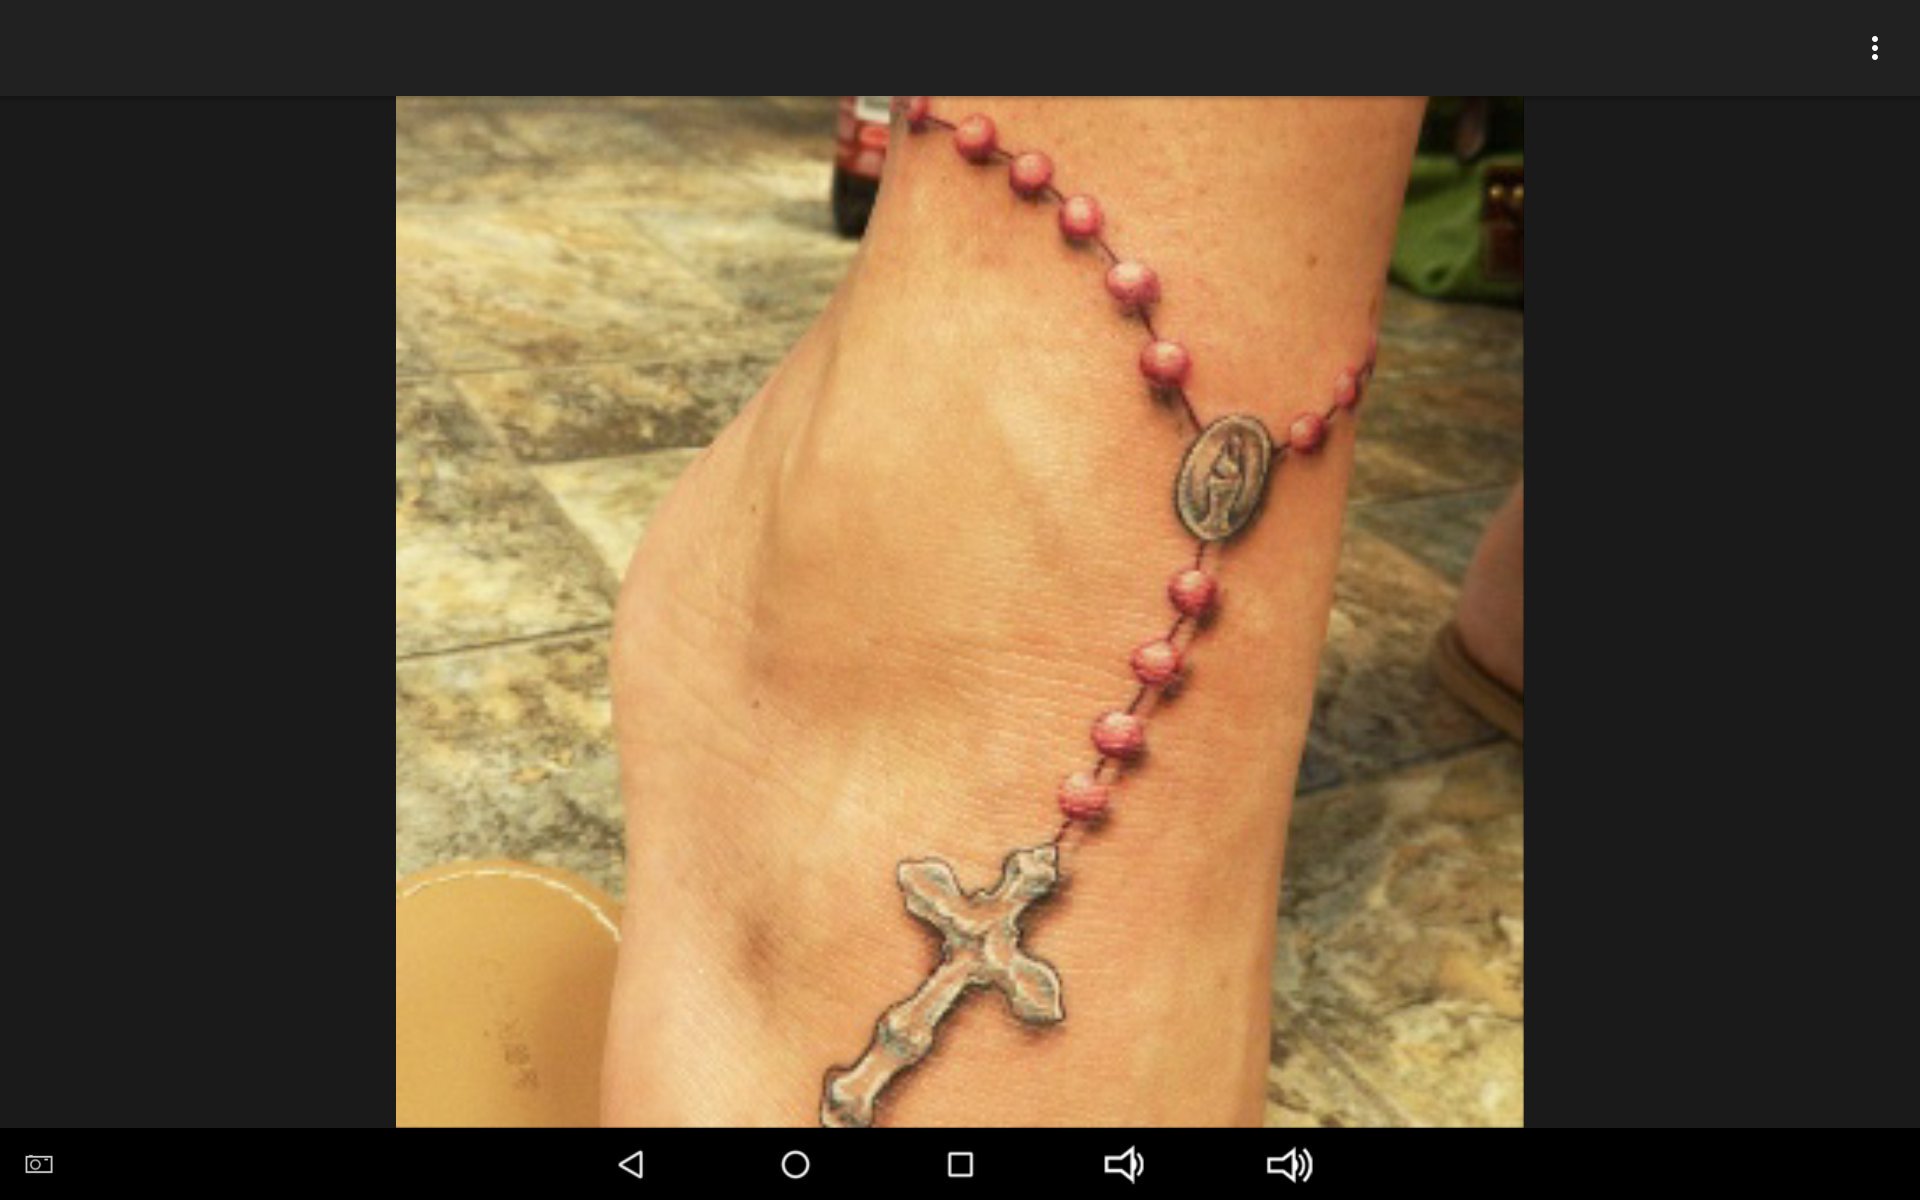 Nicole Richie Shows Off Her Anklet Design Rosary Foot Tattoo